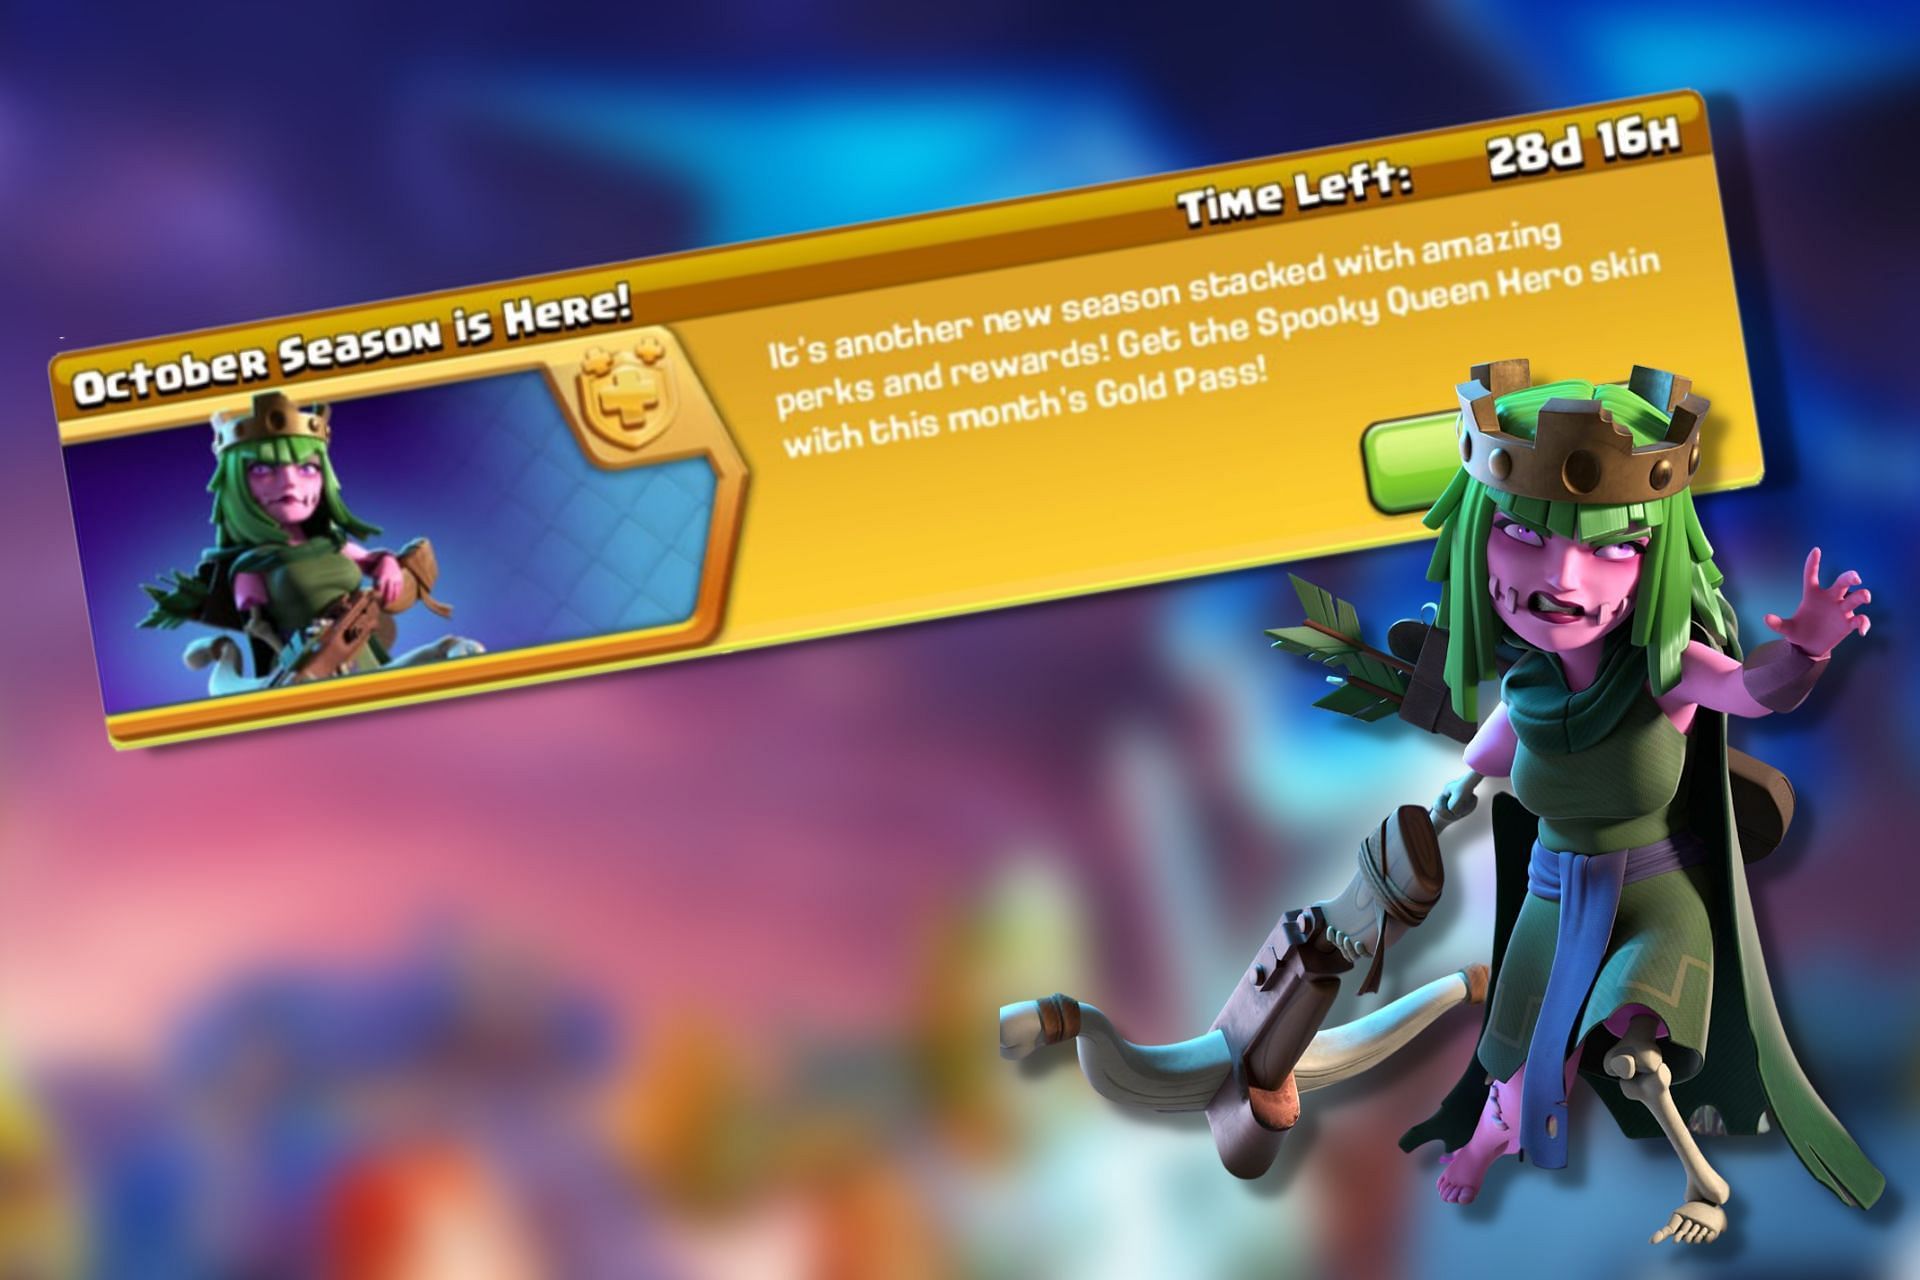 October Seasonal Challenges Rewards, Hero Skins, and more in Clash of Clans